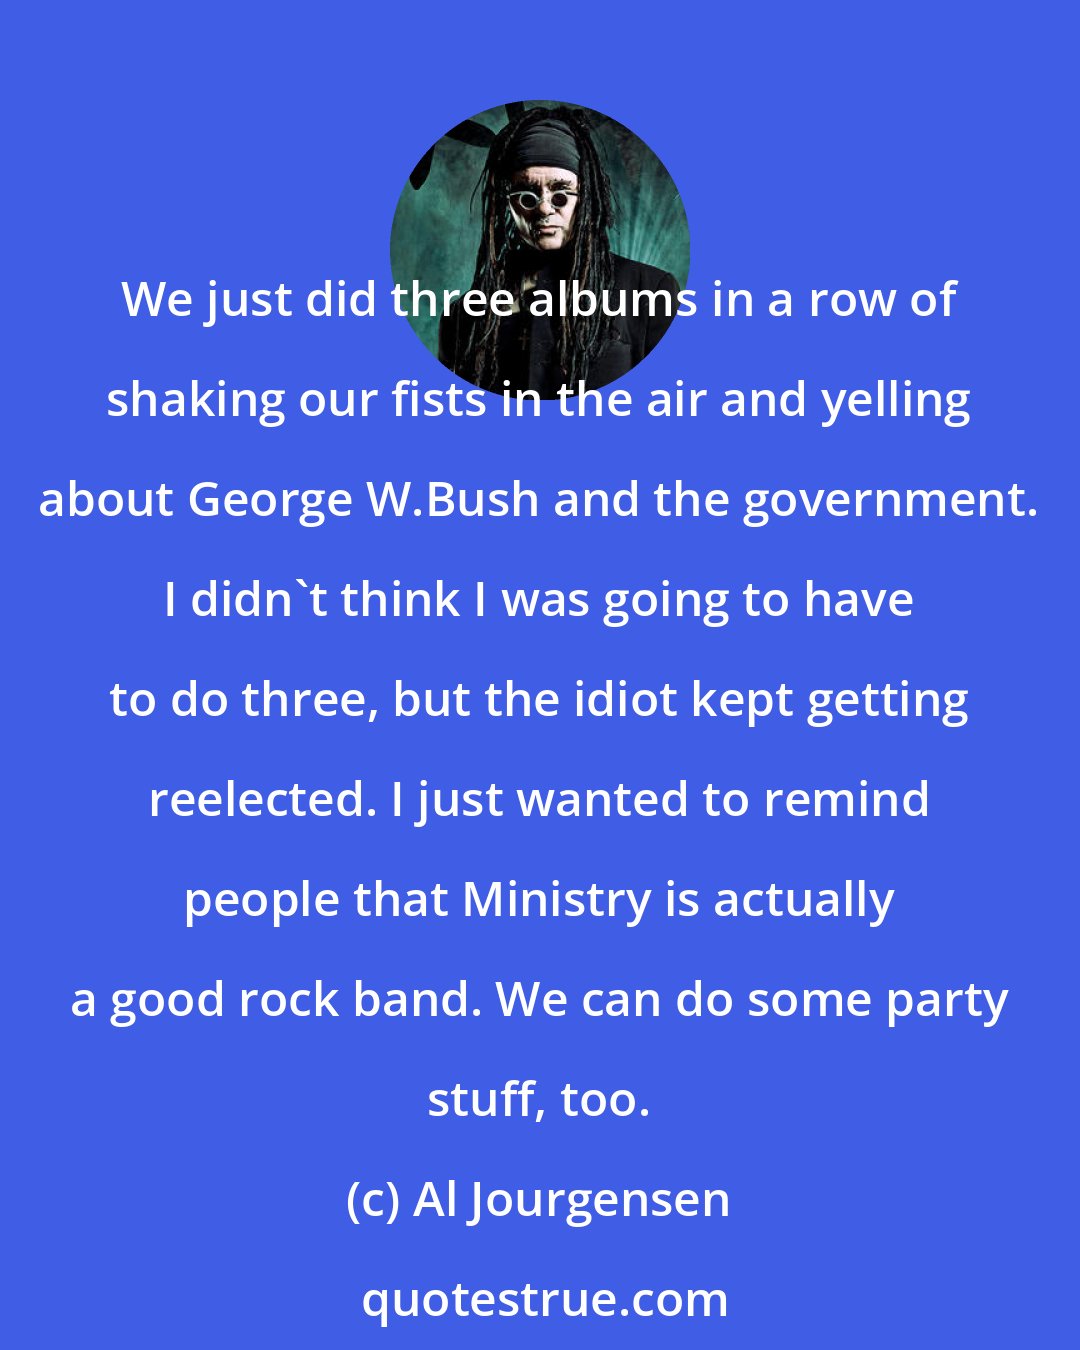 Al Jourgensen: We just did three albums in a row of shaking our fists in the air and yelling about George W.Bush and the government. I didn't think I was going to have to do three, but the idiot kept getting reelected. I just wanted to remind people that Ministry is actually a good rock band. We can do some party stuff, too.